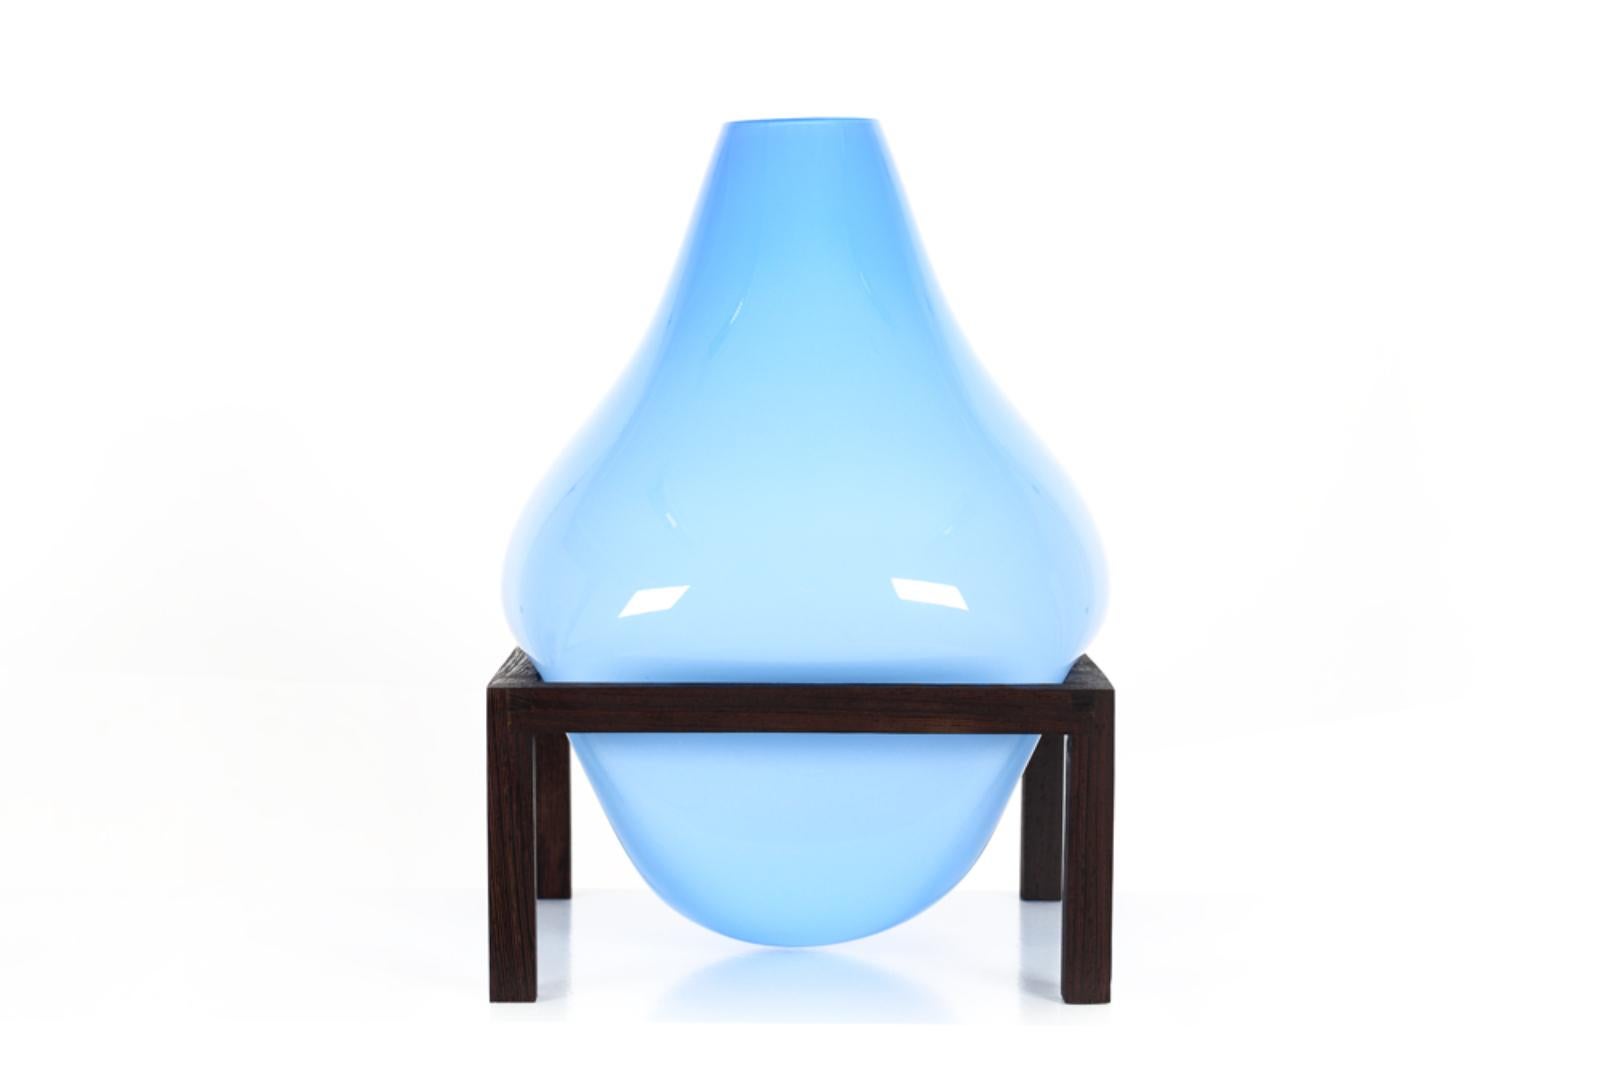 Round square blue bubble vase by Studio Thier & van Daalen
Dimensions: W 30 x D 30 x H 35cm
Materials: Wood, Glass

When blowing soap bubbles in the air Iris & Ruben had the dream to capture these temporary beauties in a tendril frame. The